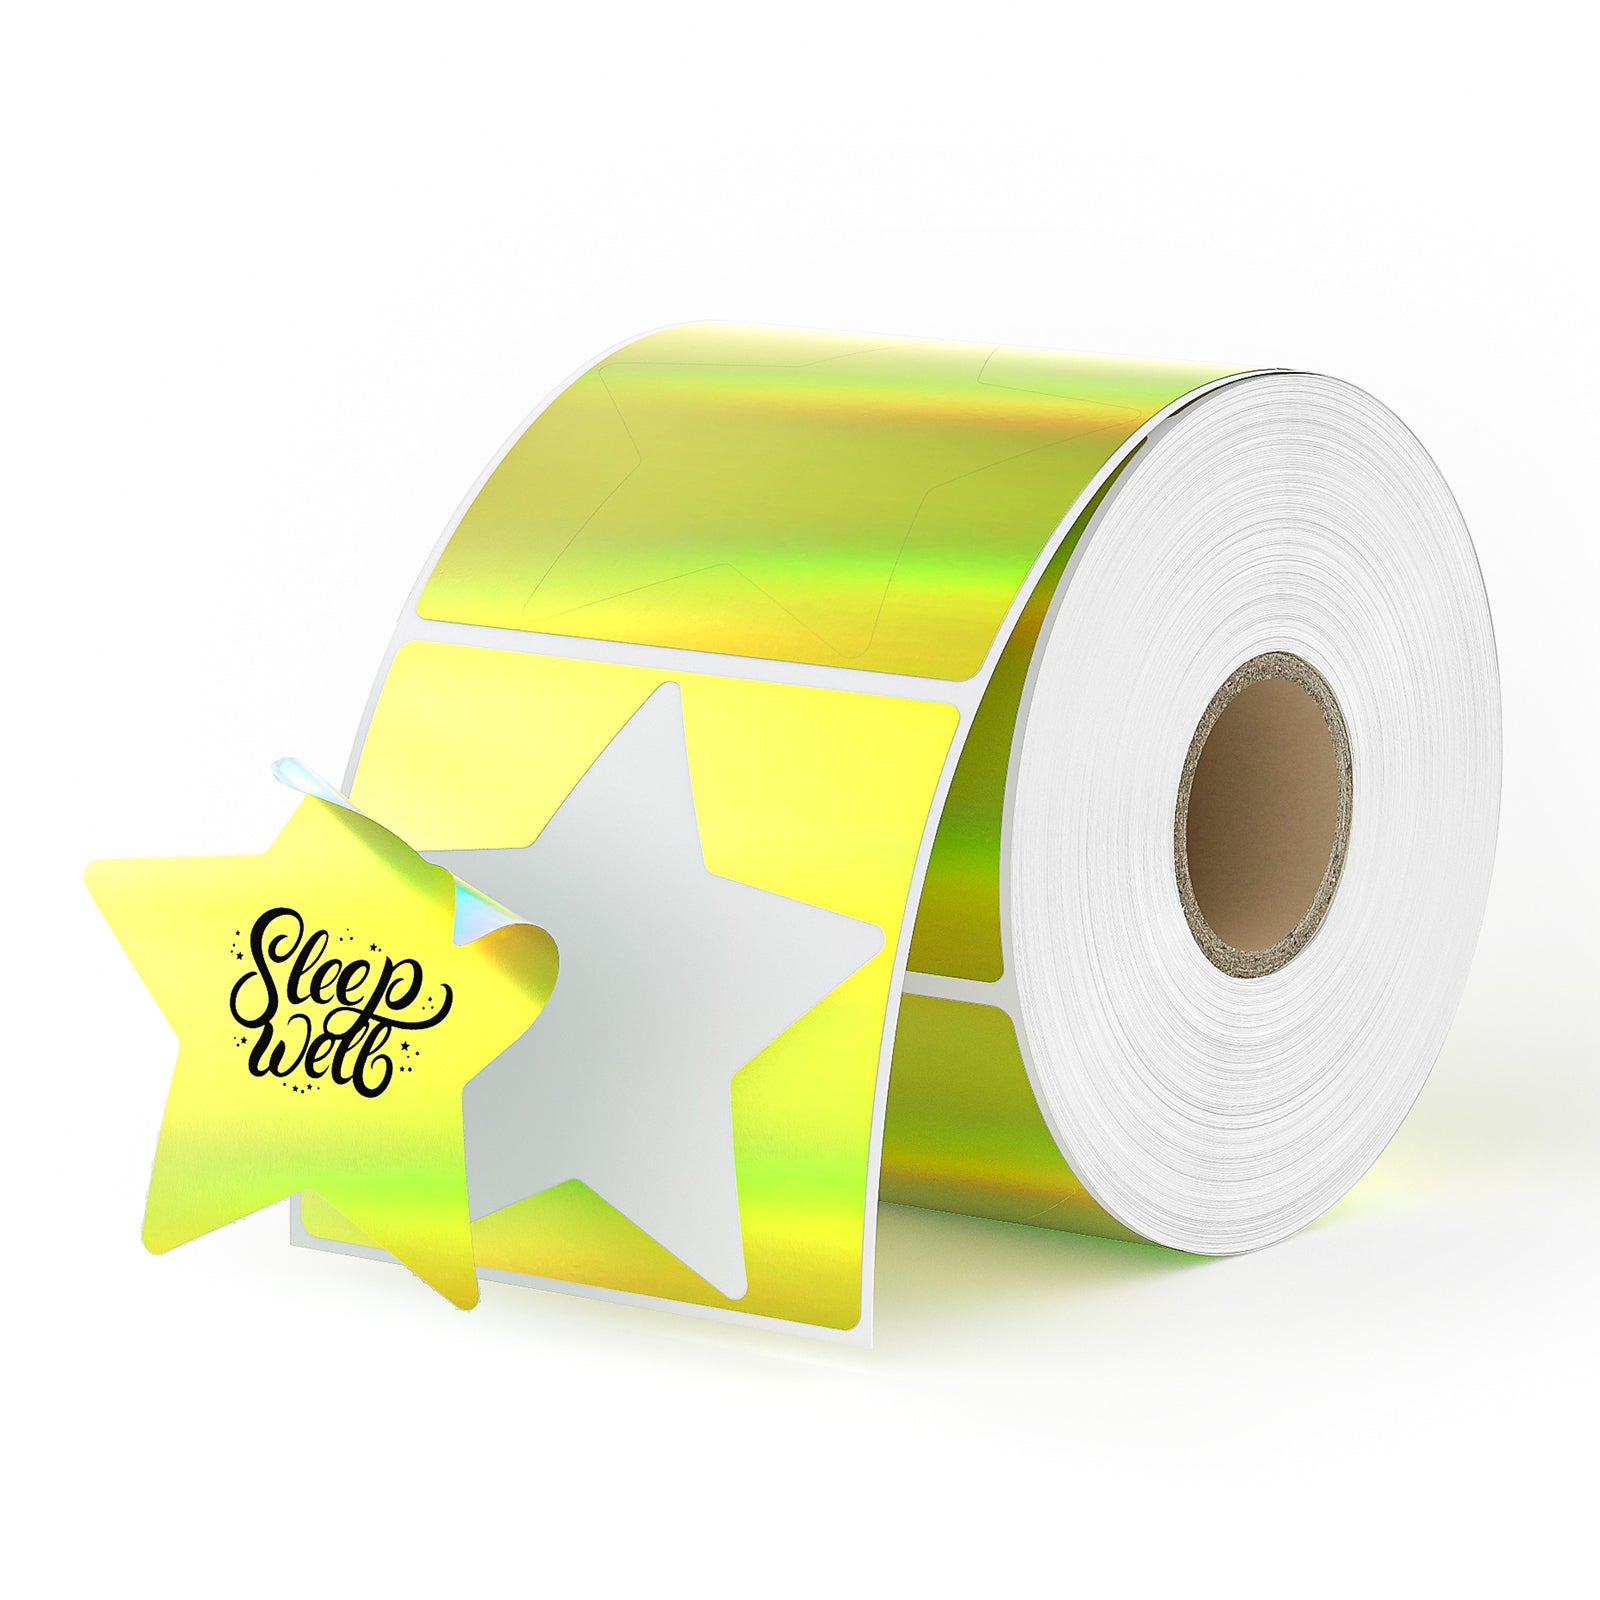 Elevate your products with MUNBYN's gold holographic star-shaped thermal labels.